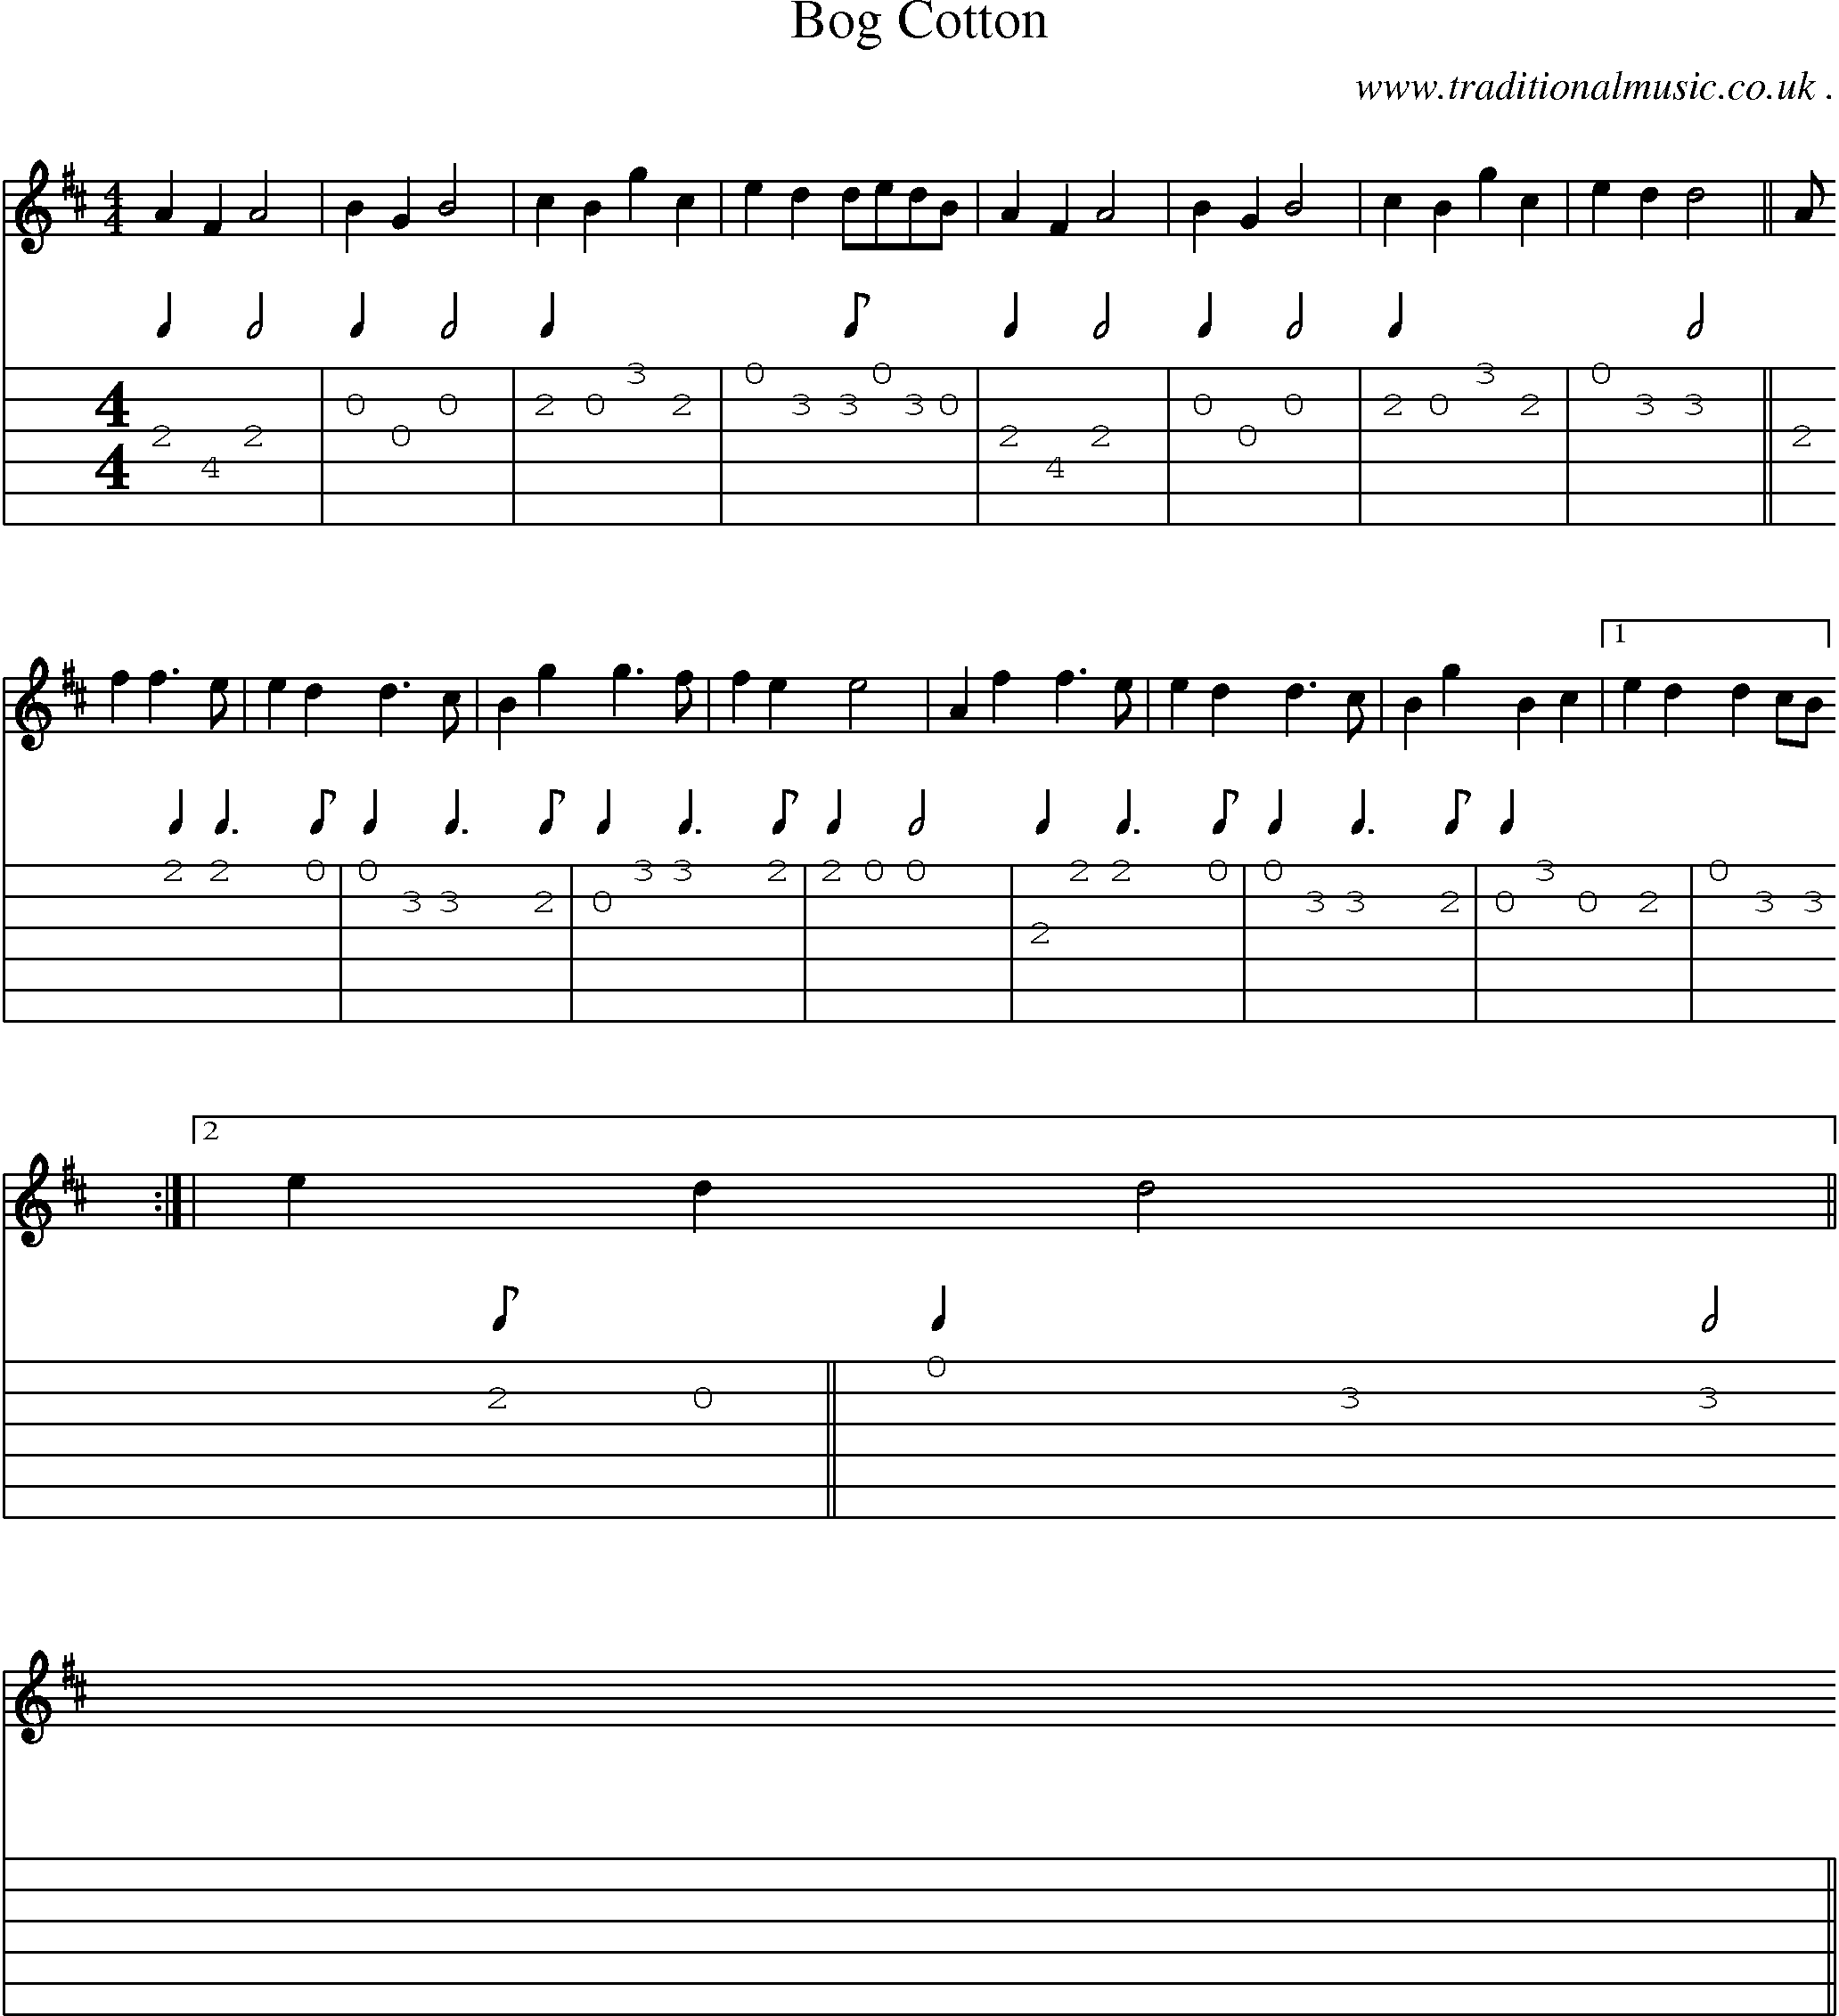 Sheet-Music and Guitar Tabs for Bog Cotton